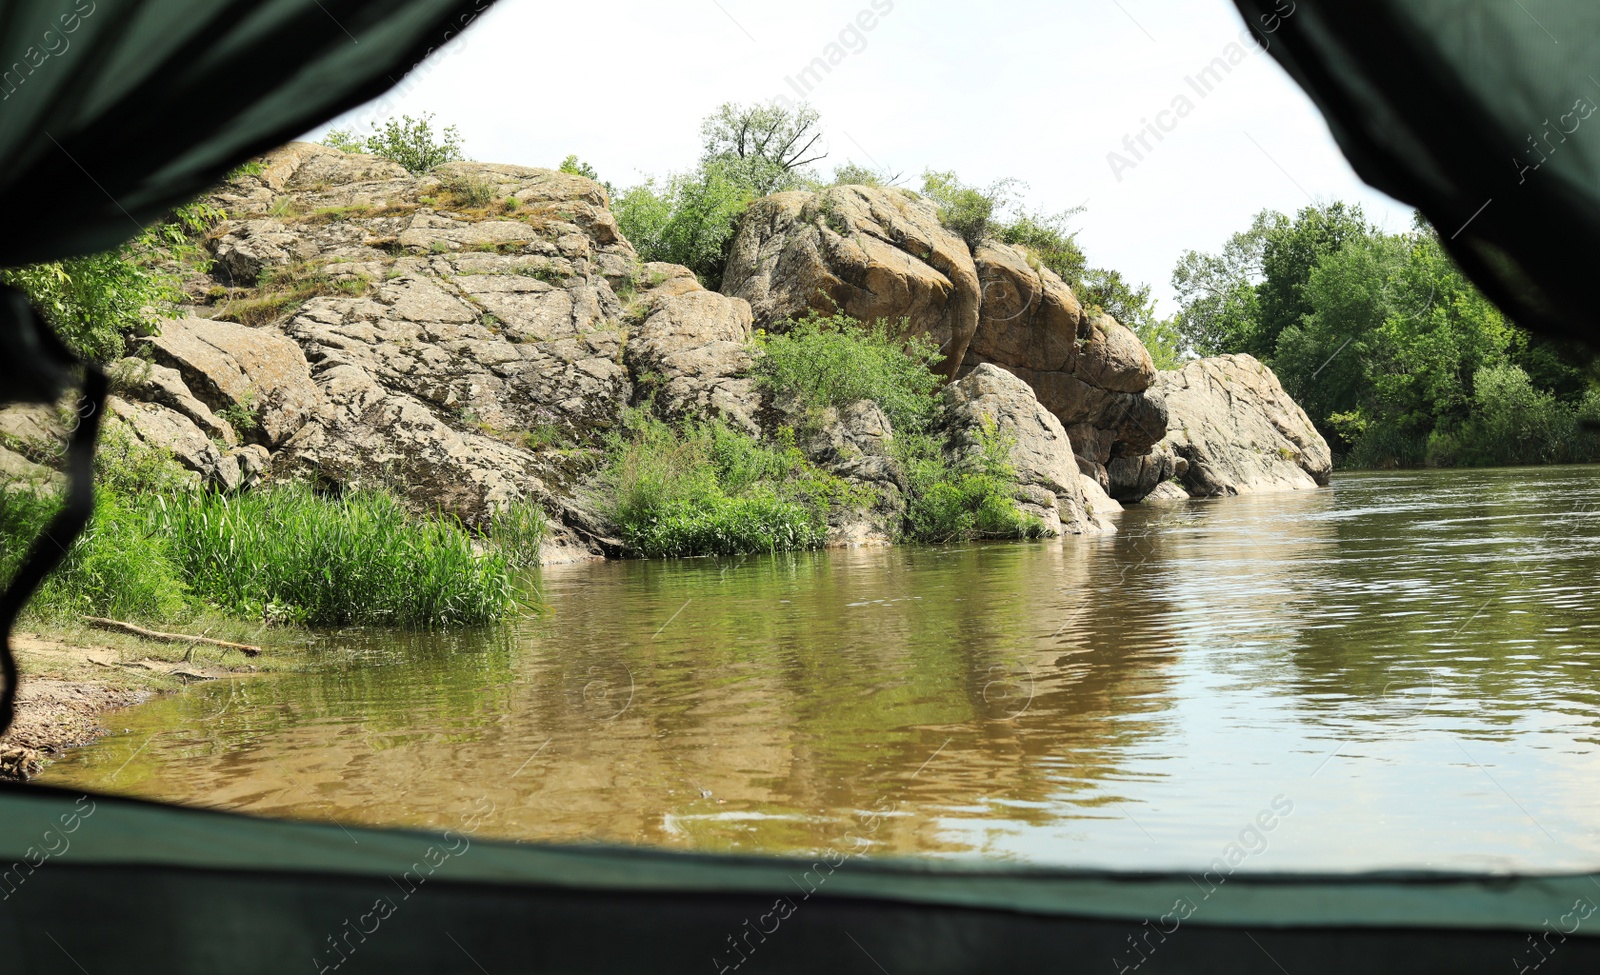 Photo of Calm river with rocky bank, view from camping tent